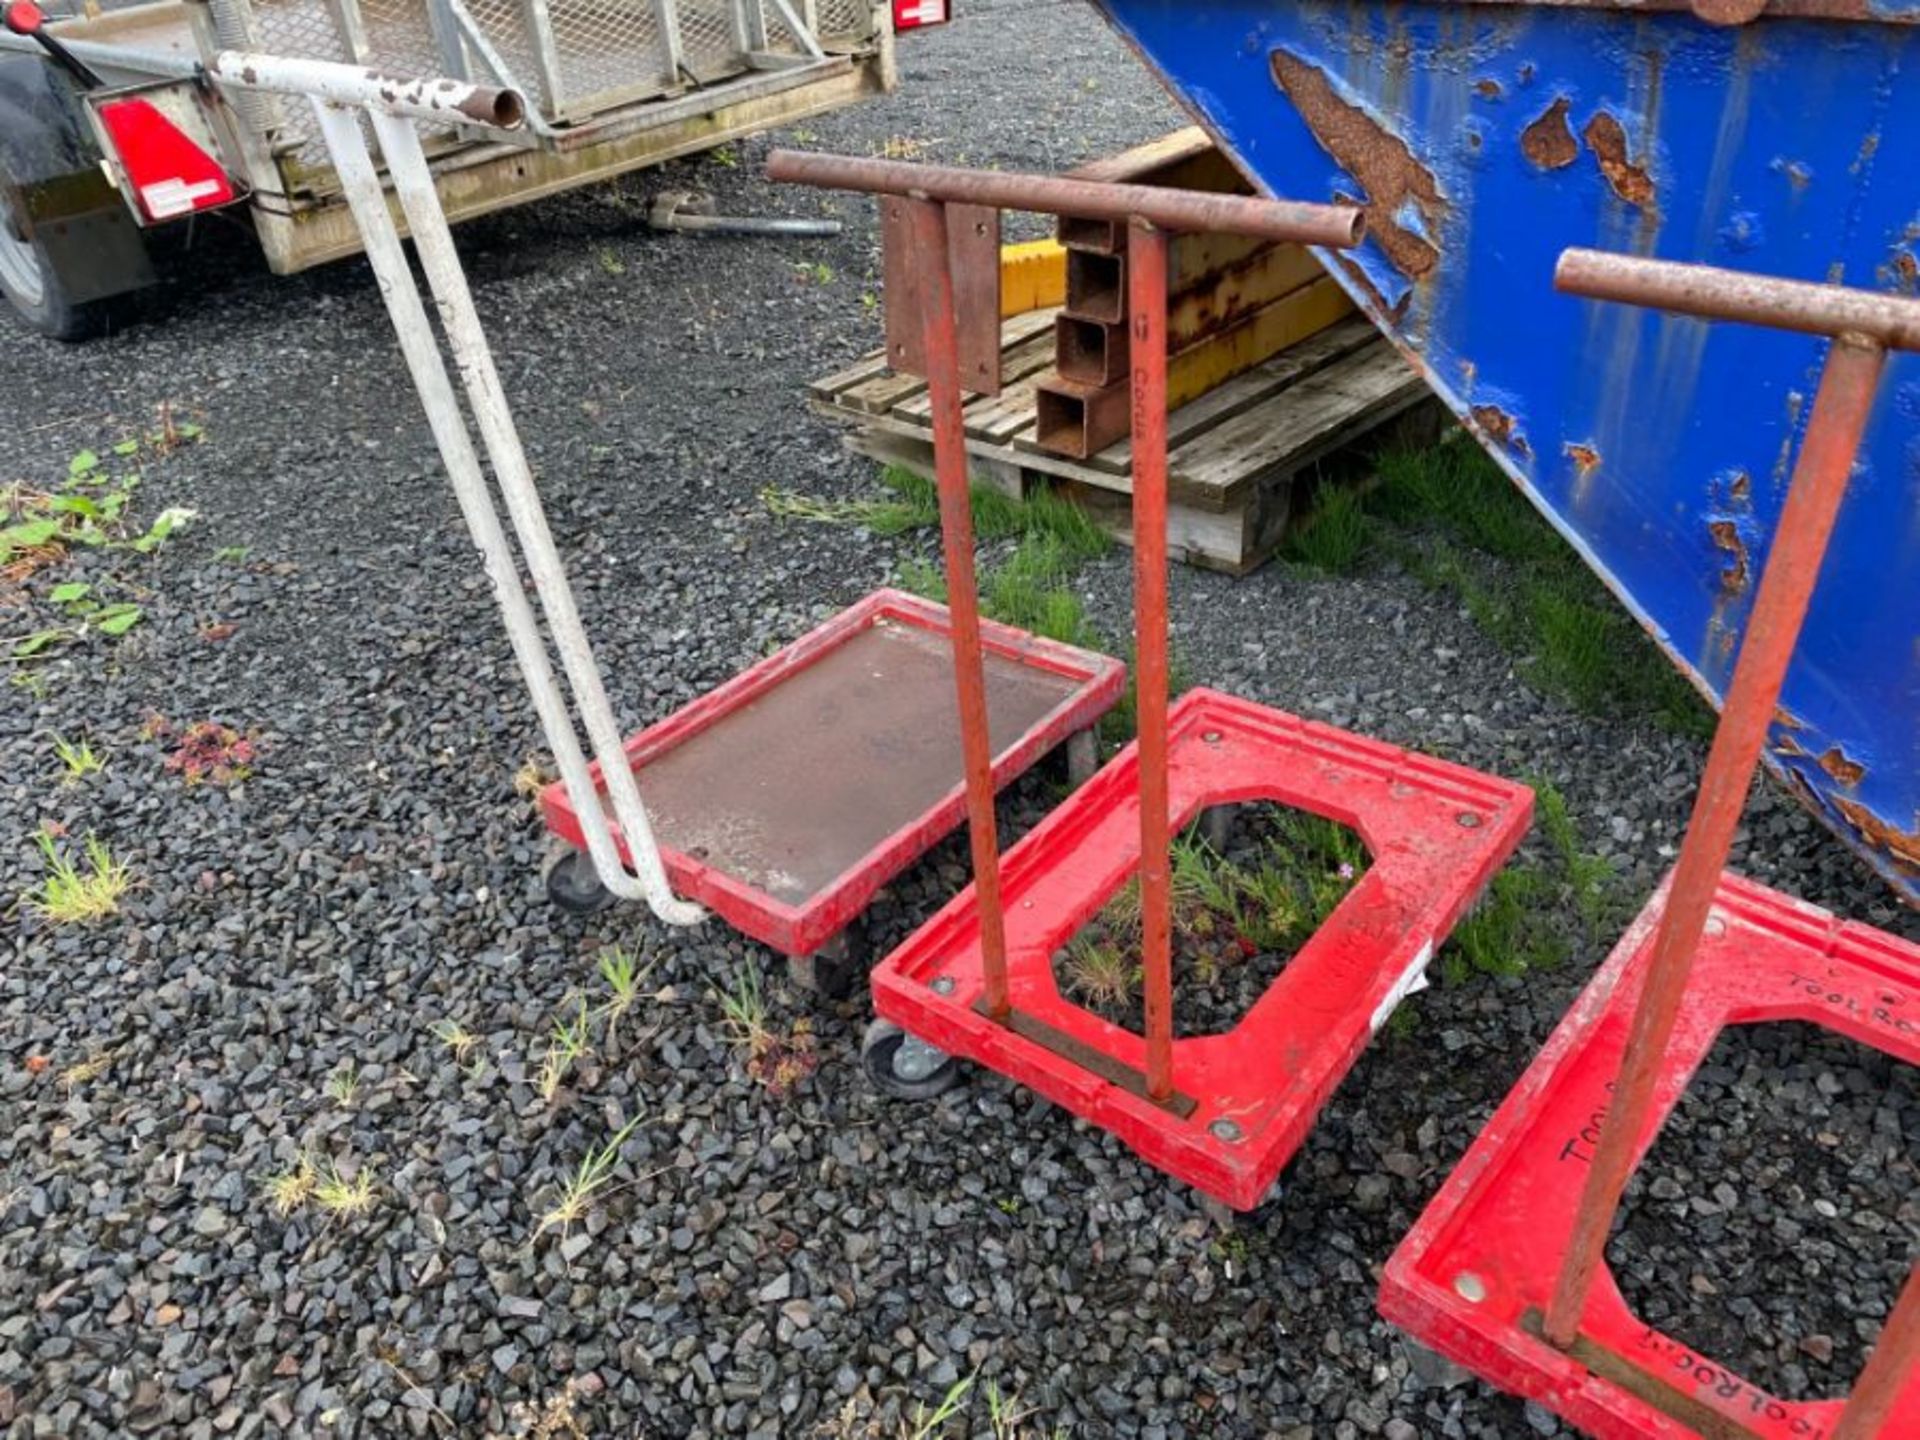 RED 4-WHEELED CRATE TROLLEY W/ HANDLE - Image 2 of 2